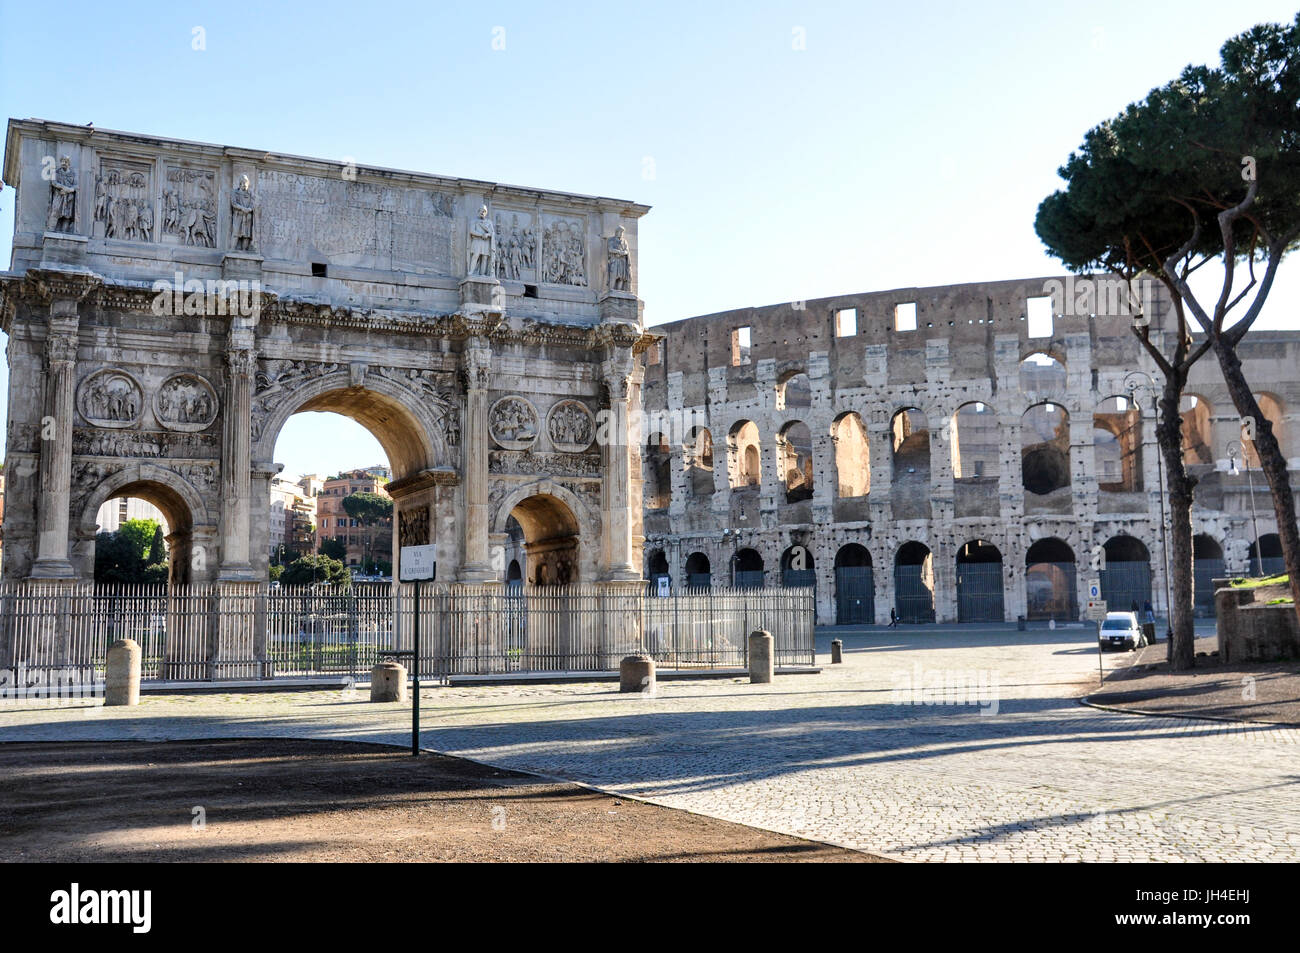 The triumphal arch, Arch of Constantine, and the Colosseum in central Rome, Italy. Stock Photo